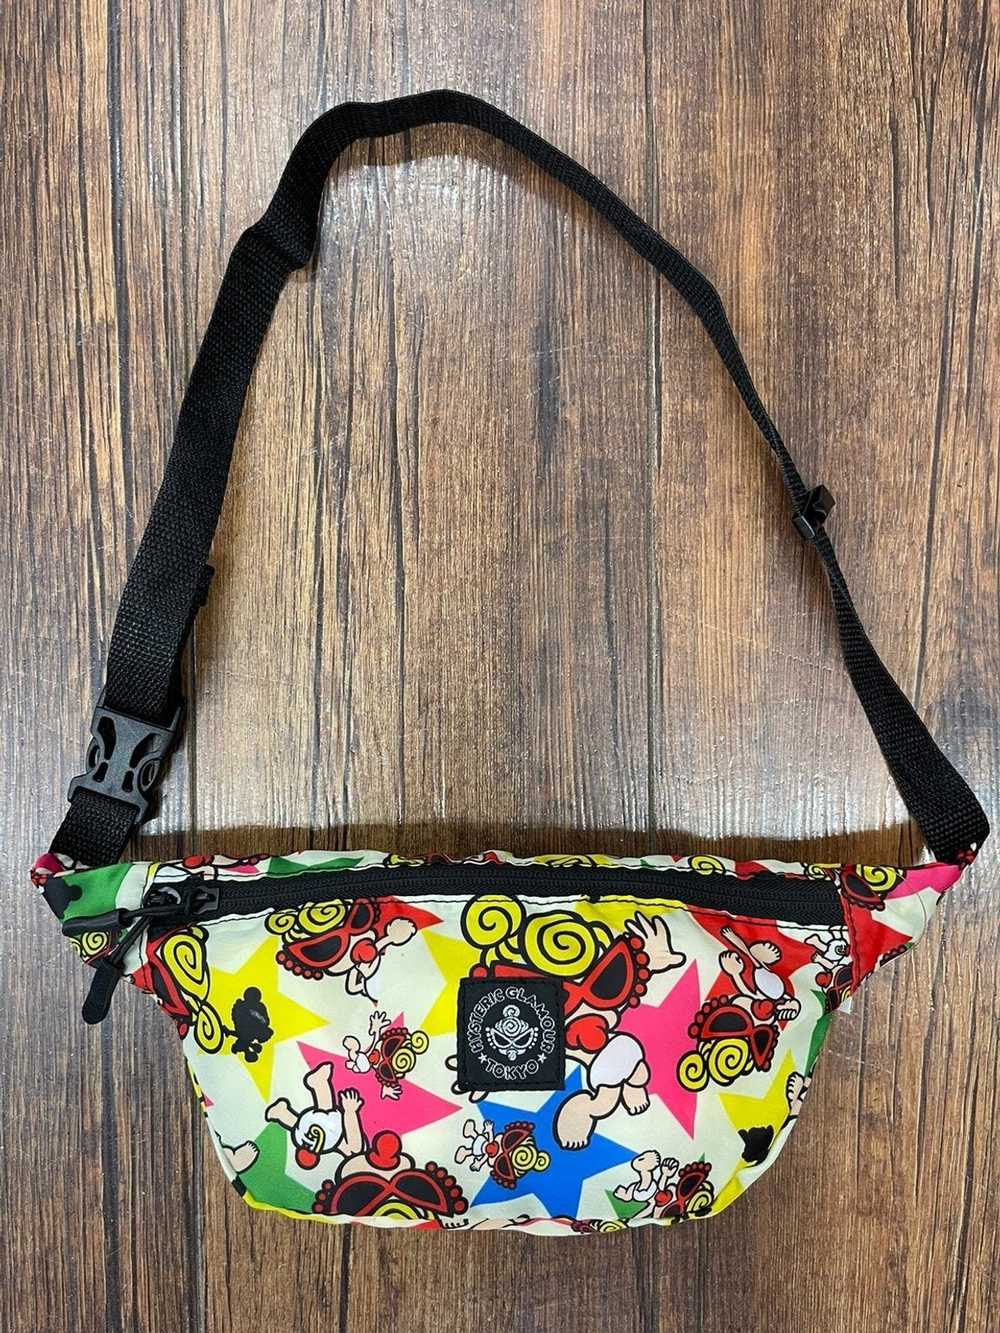 Hysteric Glamour Hysteric Glamour shoulder bag - image 3